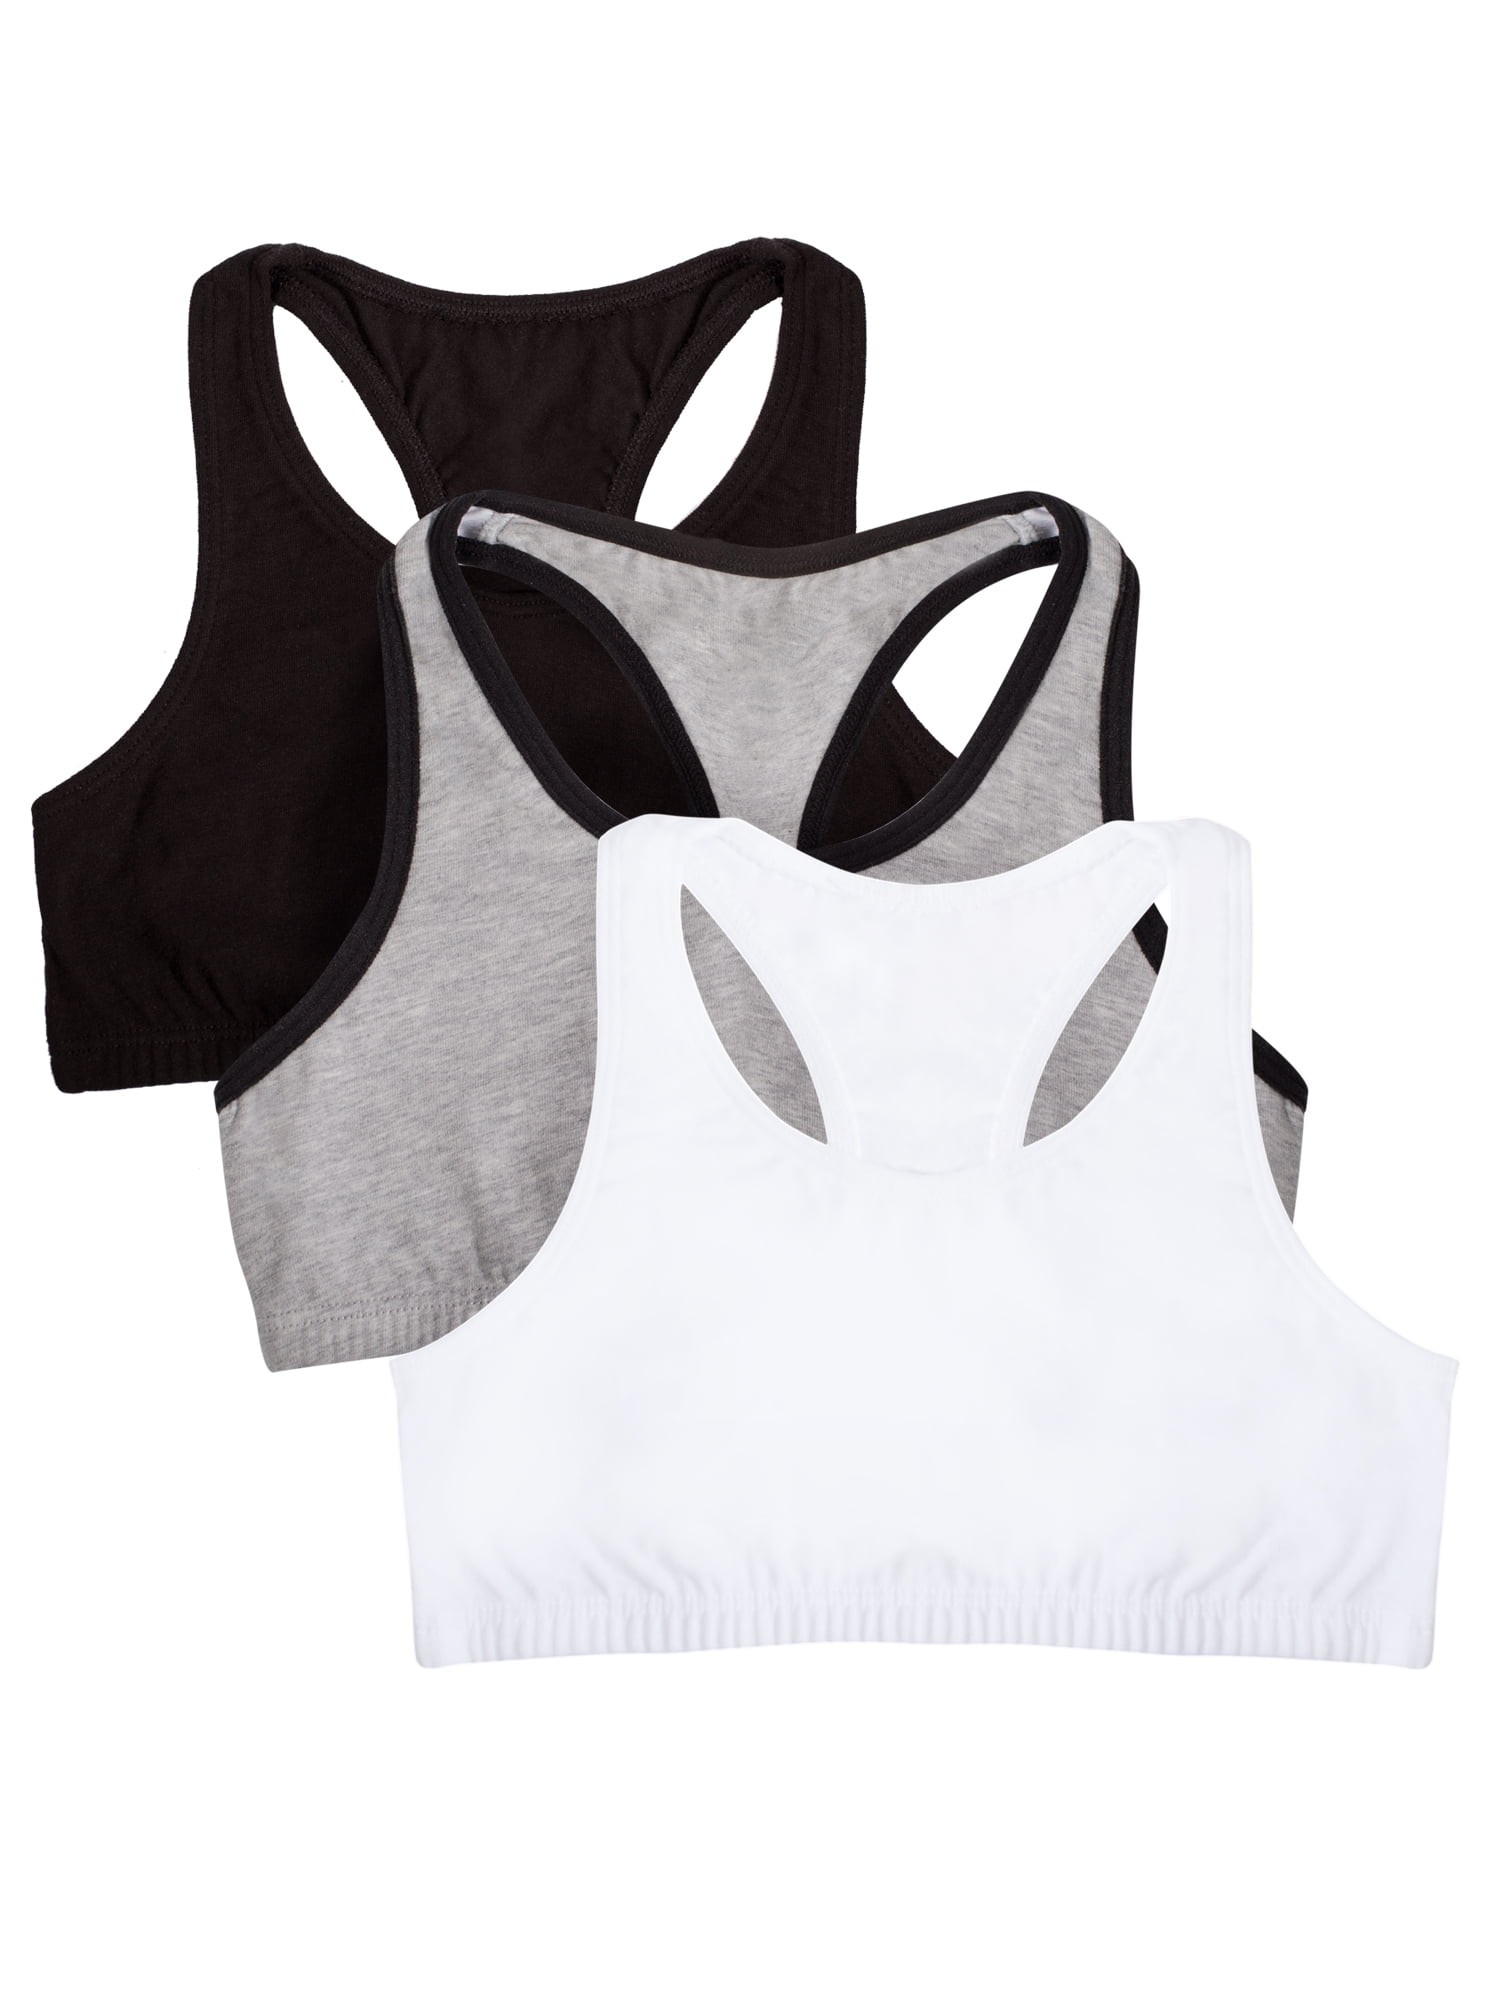 Fruit of the Loom - Fruit of the Loom Girls Cotton Sports Bra 3-Pack ...